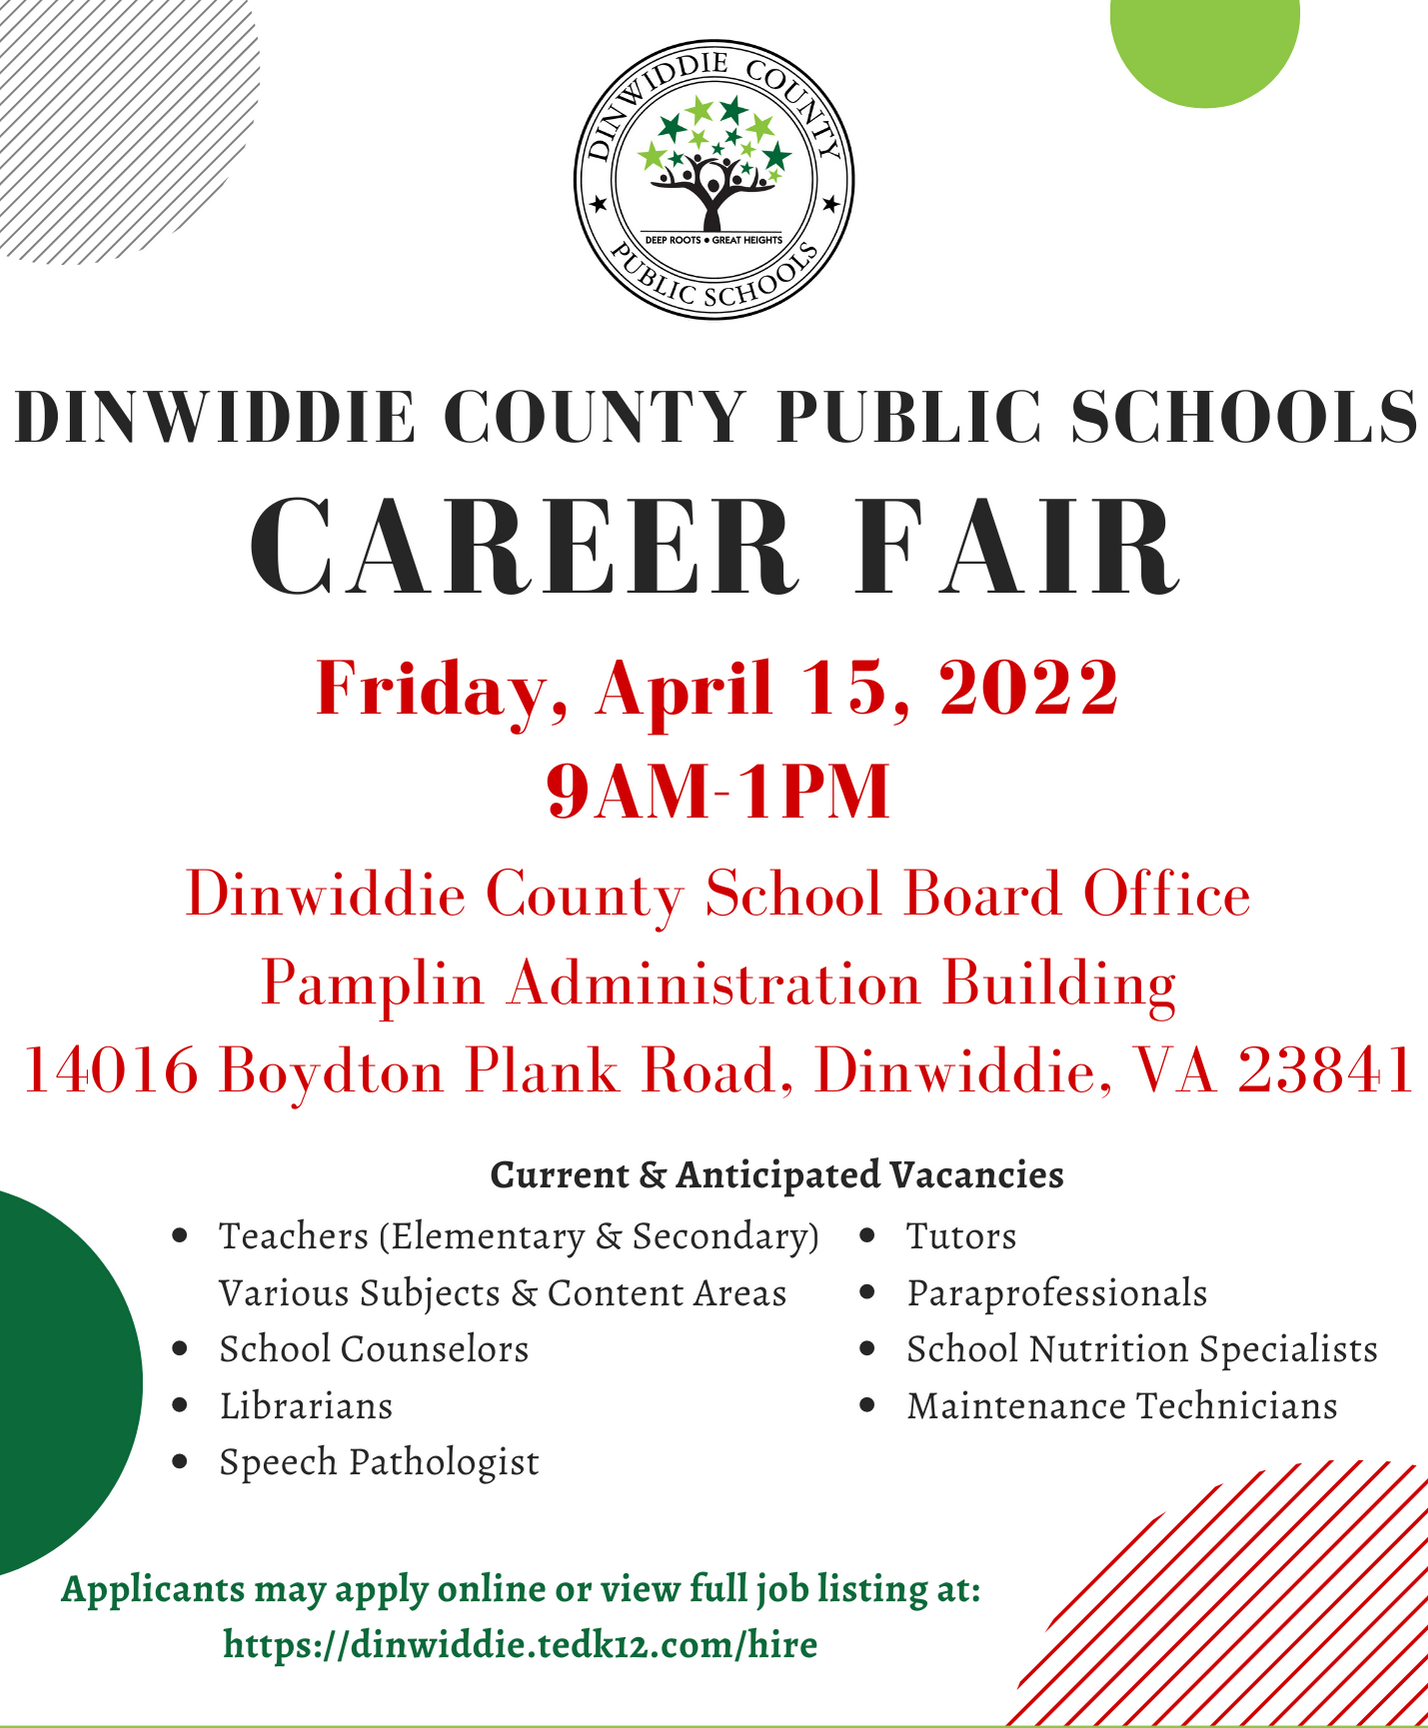 DINWIDDIE COUNTY PUBLIC SCHOOLS CAREER FAIR Friday, April 15, 2022, 9 a.m. -1 p.m. Dinwiddie County School Board, Office Pamplin Administration Building, 14016 Boydton Plank Road, Dinwiddie, VA 23841. Applicants may apply online or view full job listing at: https://dinwiddie.tedk12.com/hire. Dinwiddie County Public Schools is an Equal Opportunity Employer. Current and Anticipated Vacancies: Teachers (Elementary & Secondary) Various Subjects & Content Areas, School Counselors Librarians, Speech Pathologist, Tutors, Paraprofessionals, School Nutrition Specialists, Maintenance Technicians